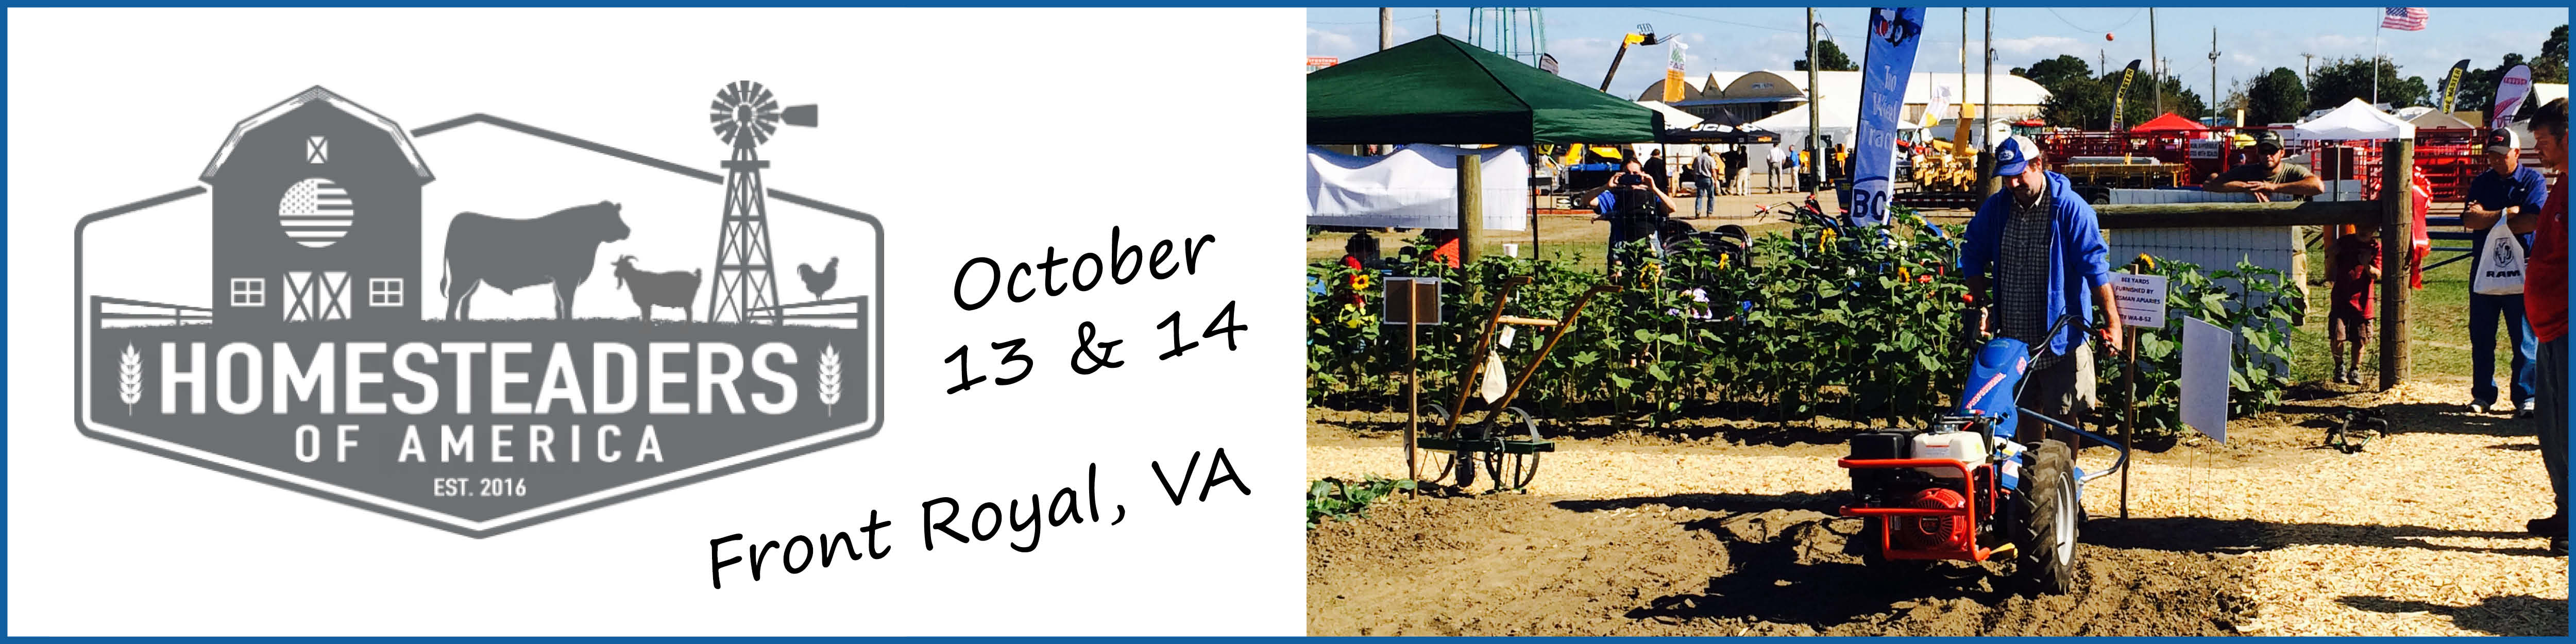 Homesteaders of America Conference - Front Royal, VA